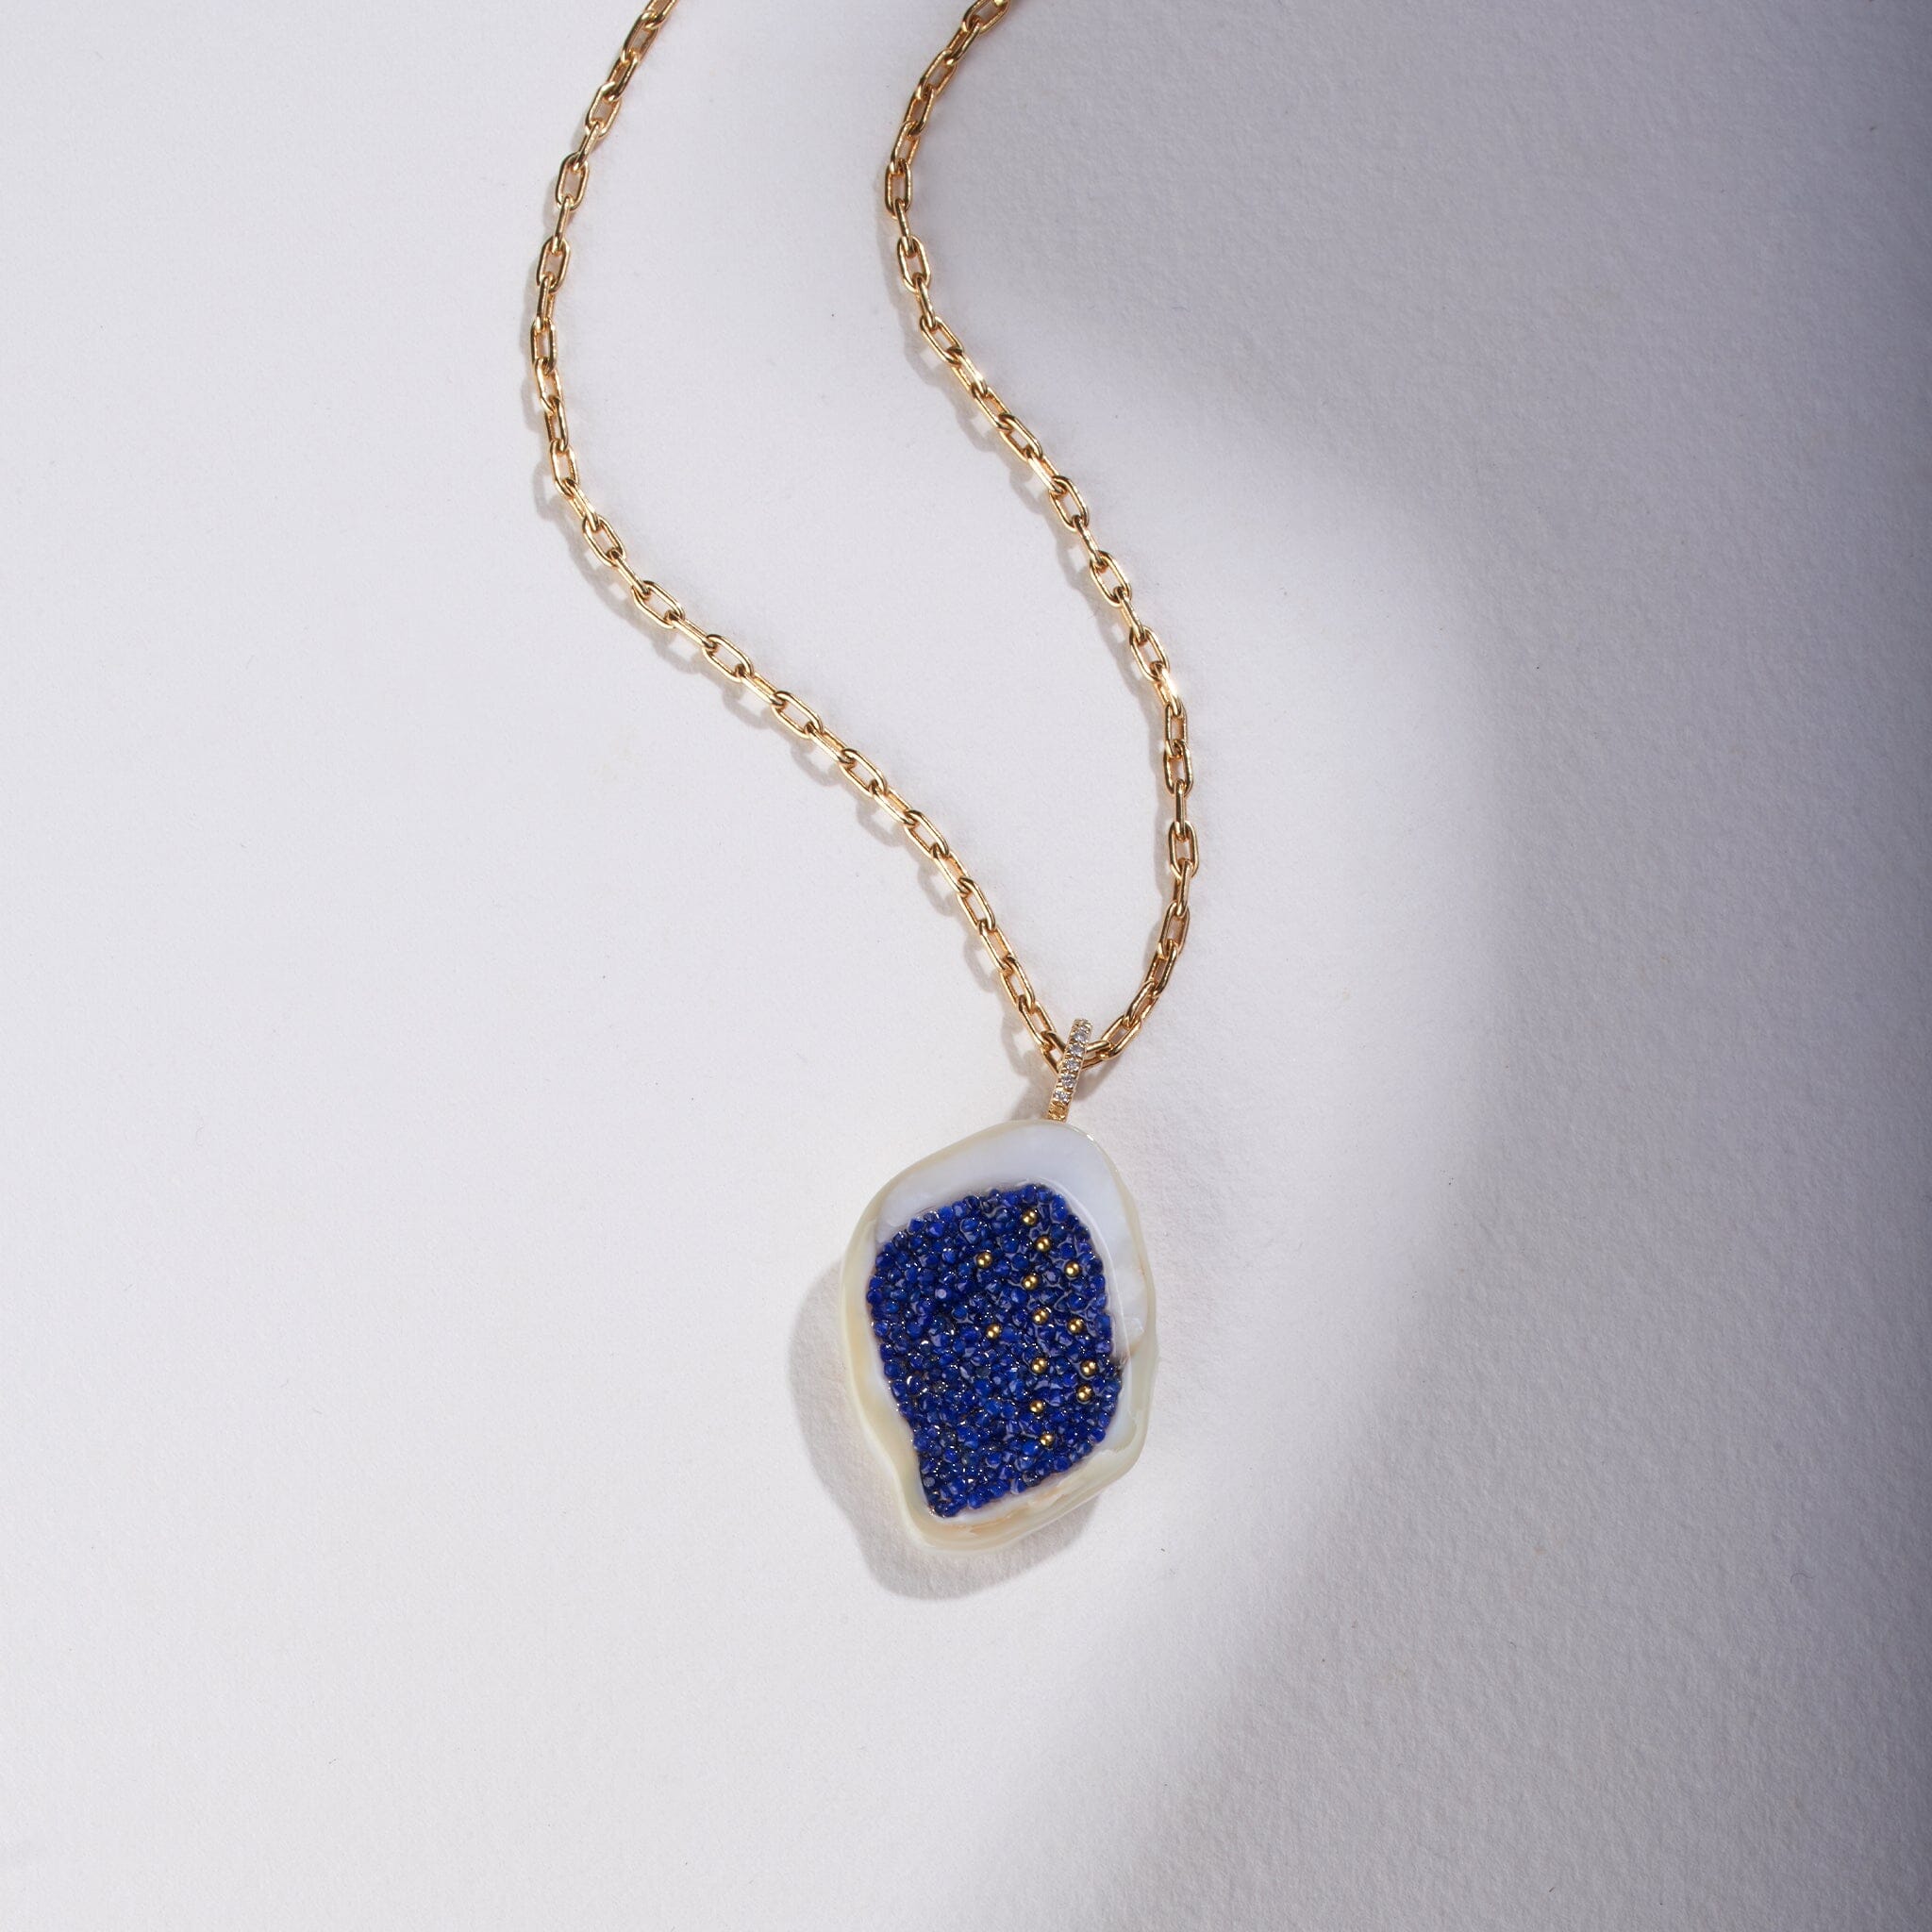 Freshwater Souffle Pearl Geode Pendant with Lapis, 22K Gold Beads and Diamond Bail